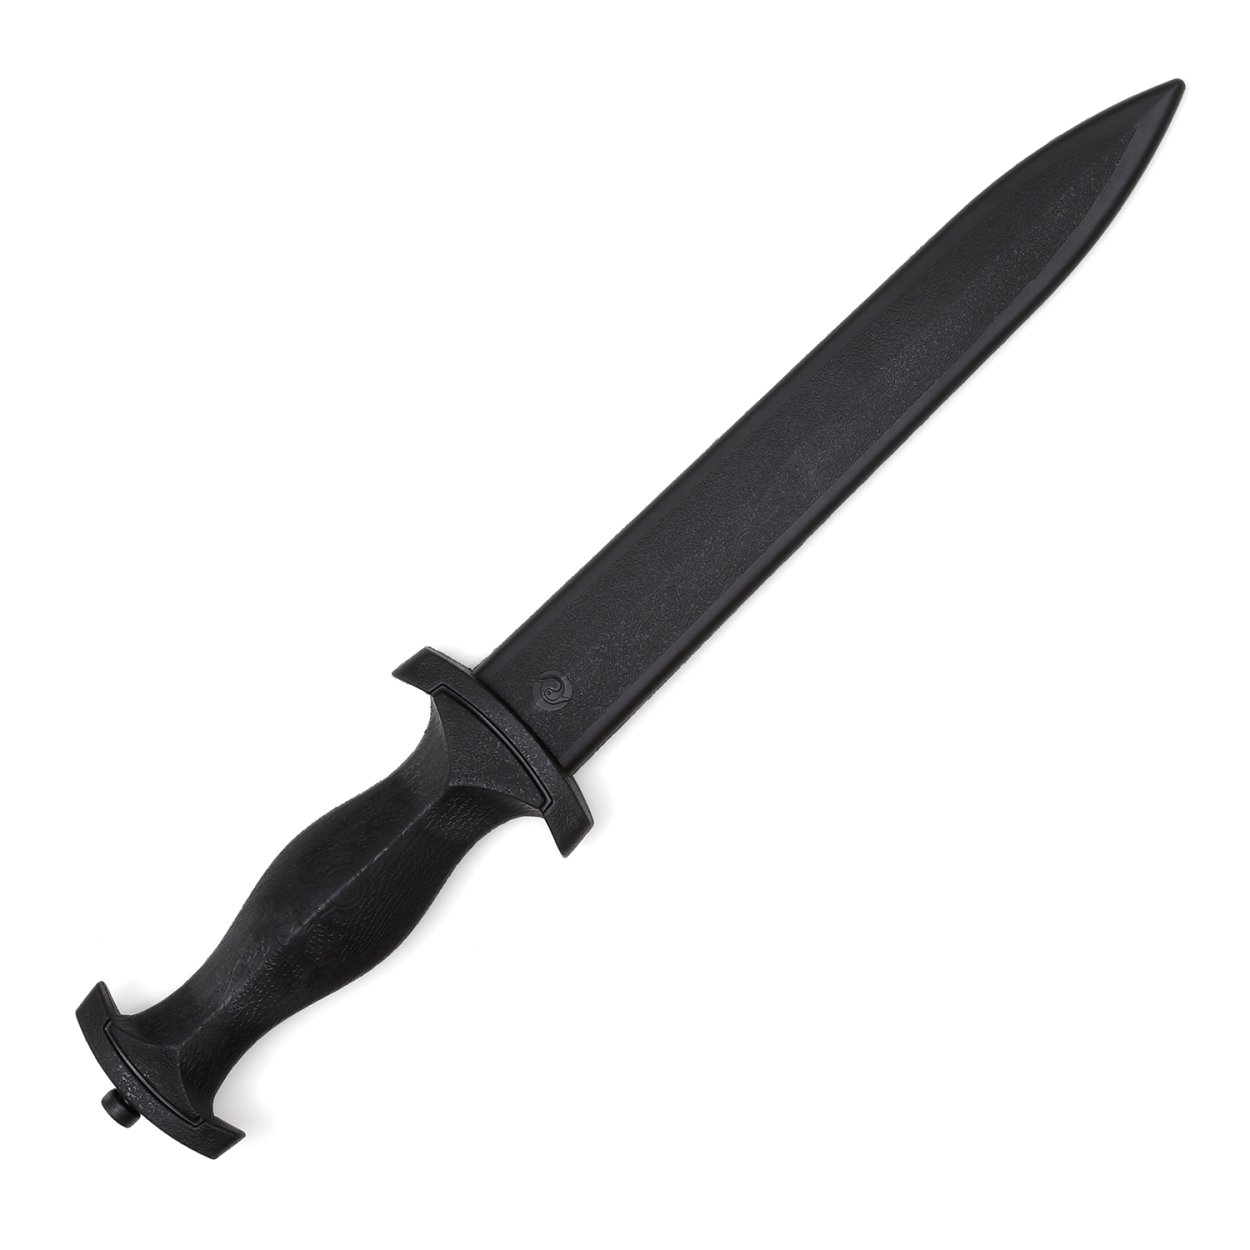 TPR Rubber "Roman" Dagger Training Knife - (kn-417) - Click Image to Close